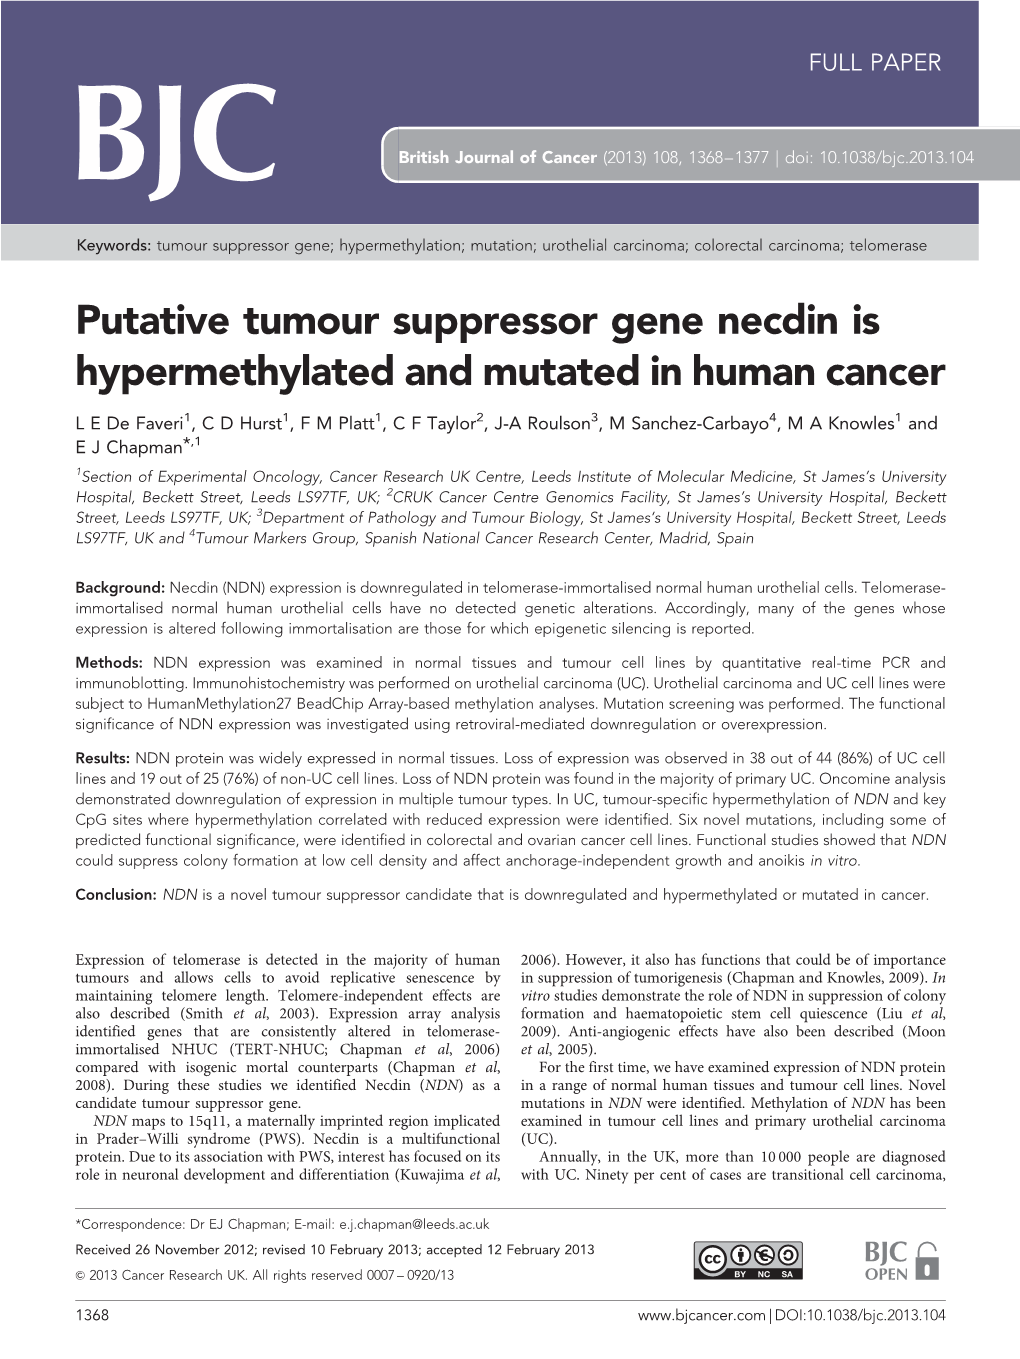 Putative Tumour Suppressor Gene Necdin Is Hypermethylated and Mutated in Human Cancer